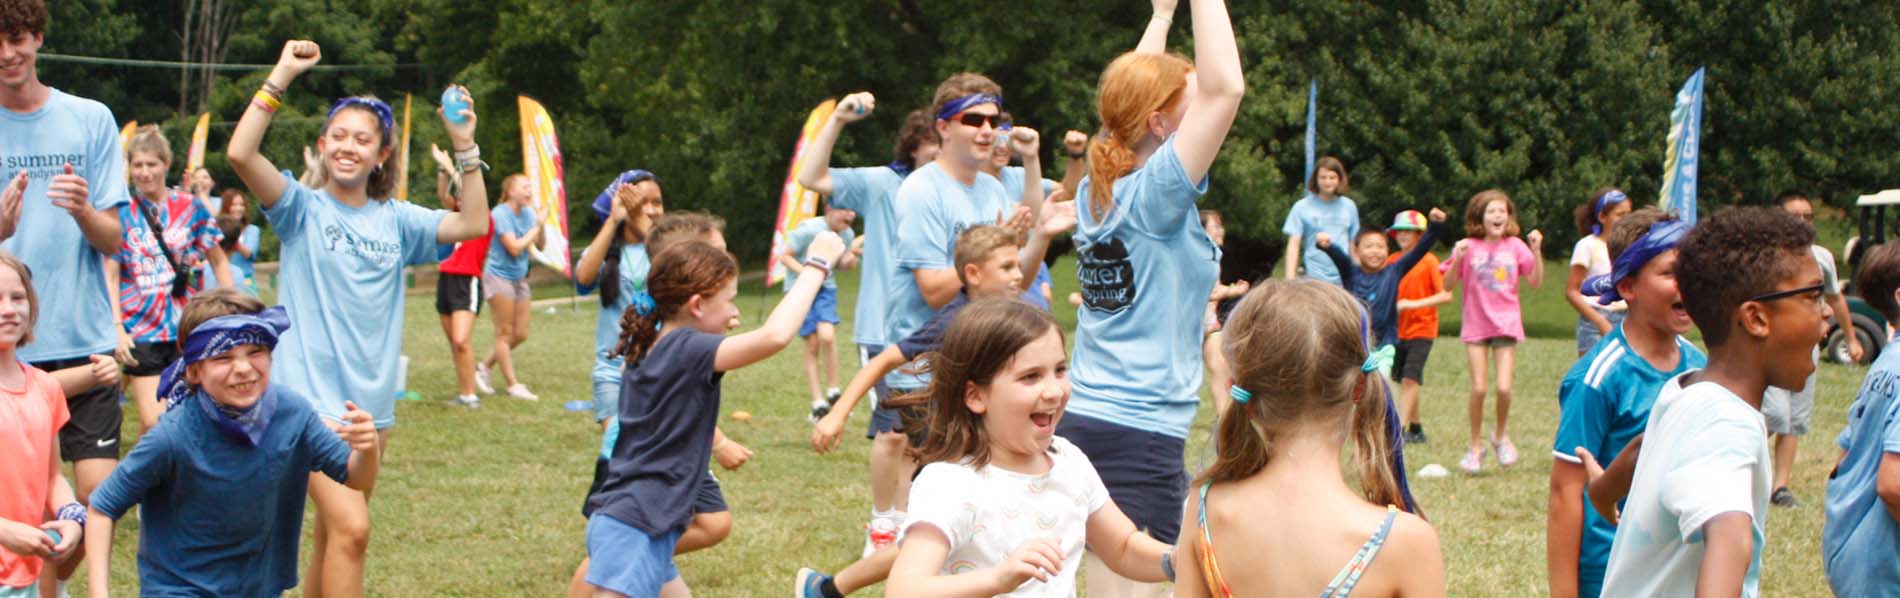 staff and kids cheering in a game outdoors